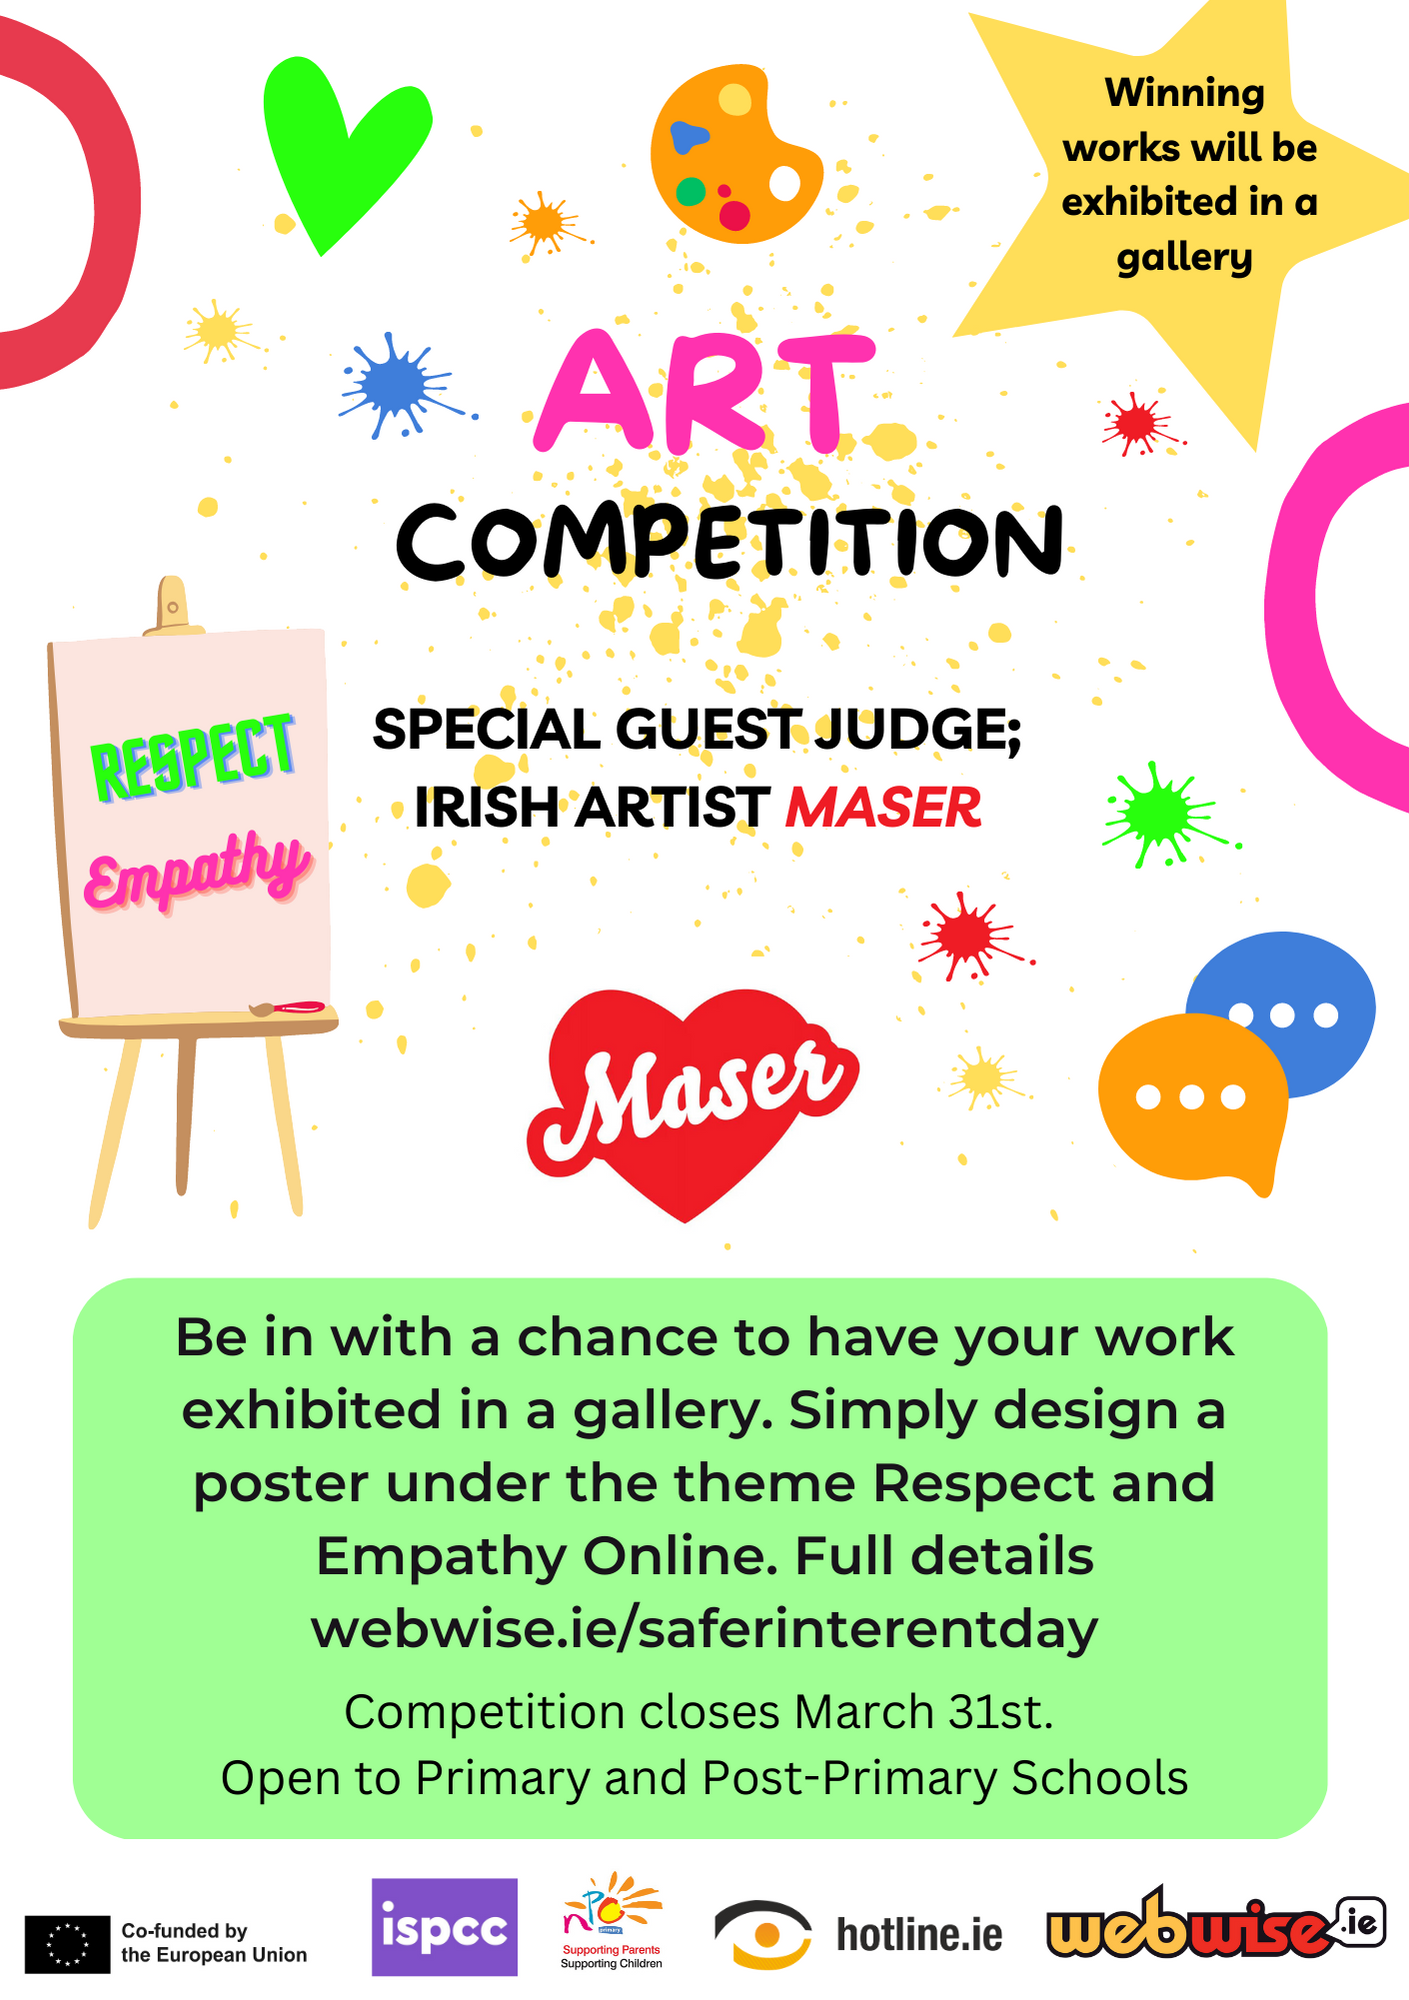 Art Competition Maser Webwise